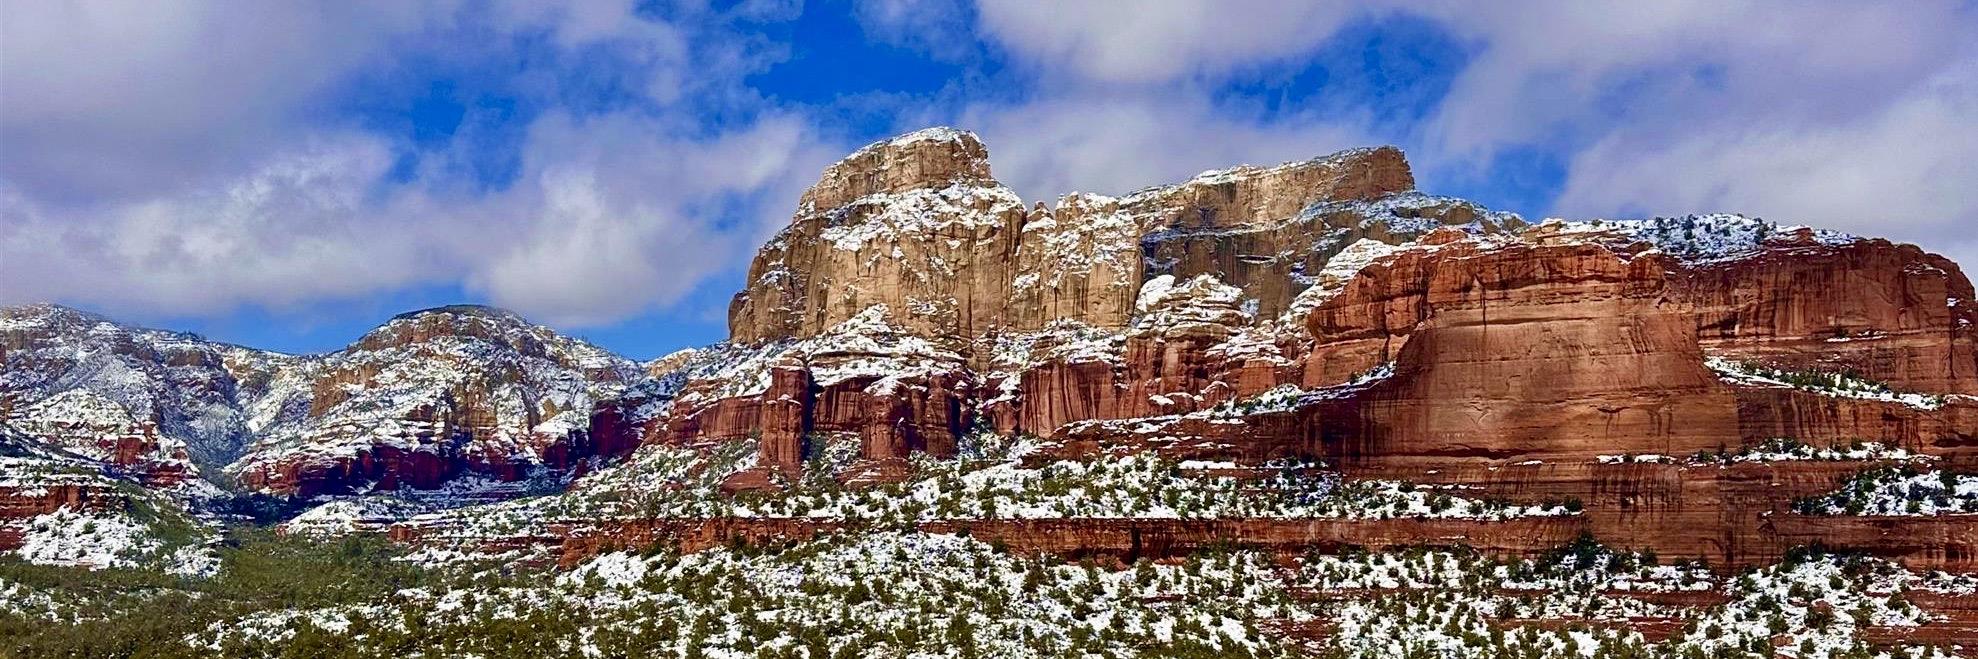 Making a Difference in Sedona for 65 Years